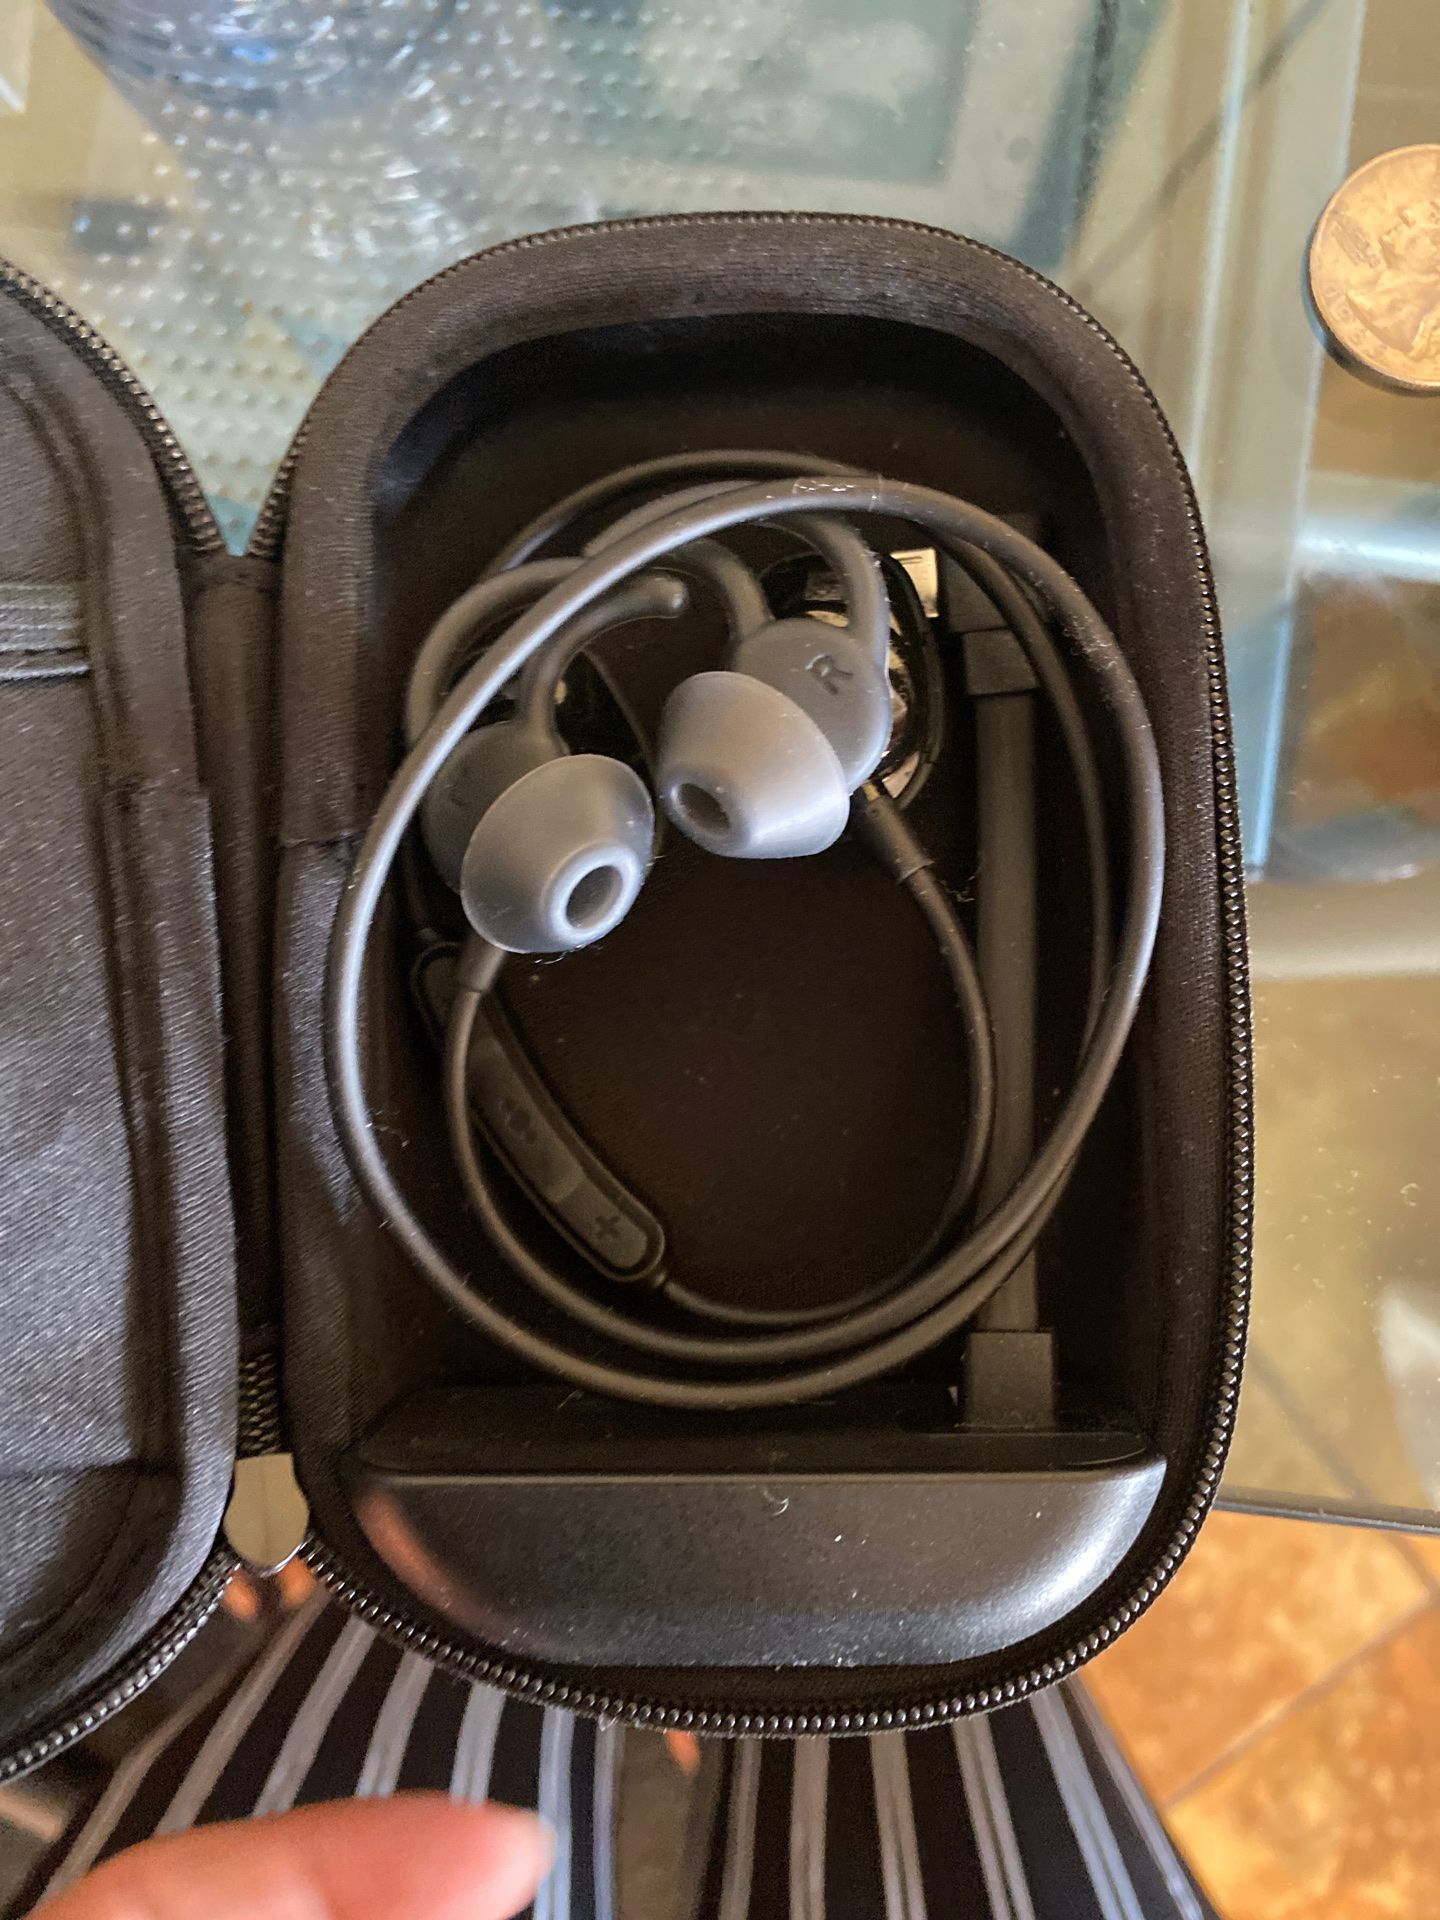 Bose sound sport with charging case included